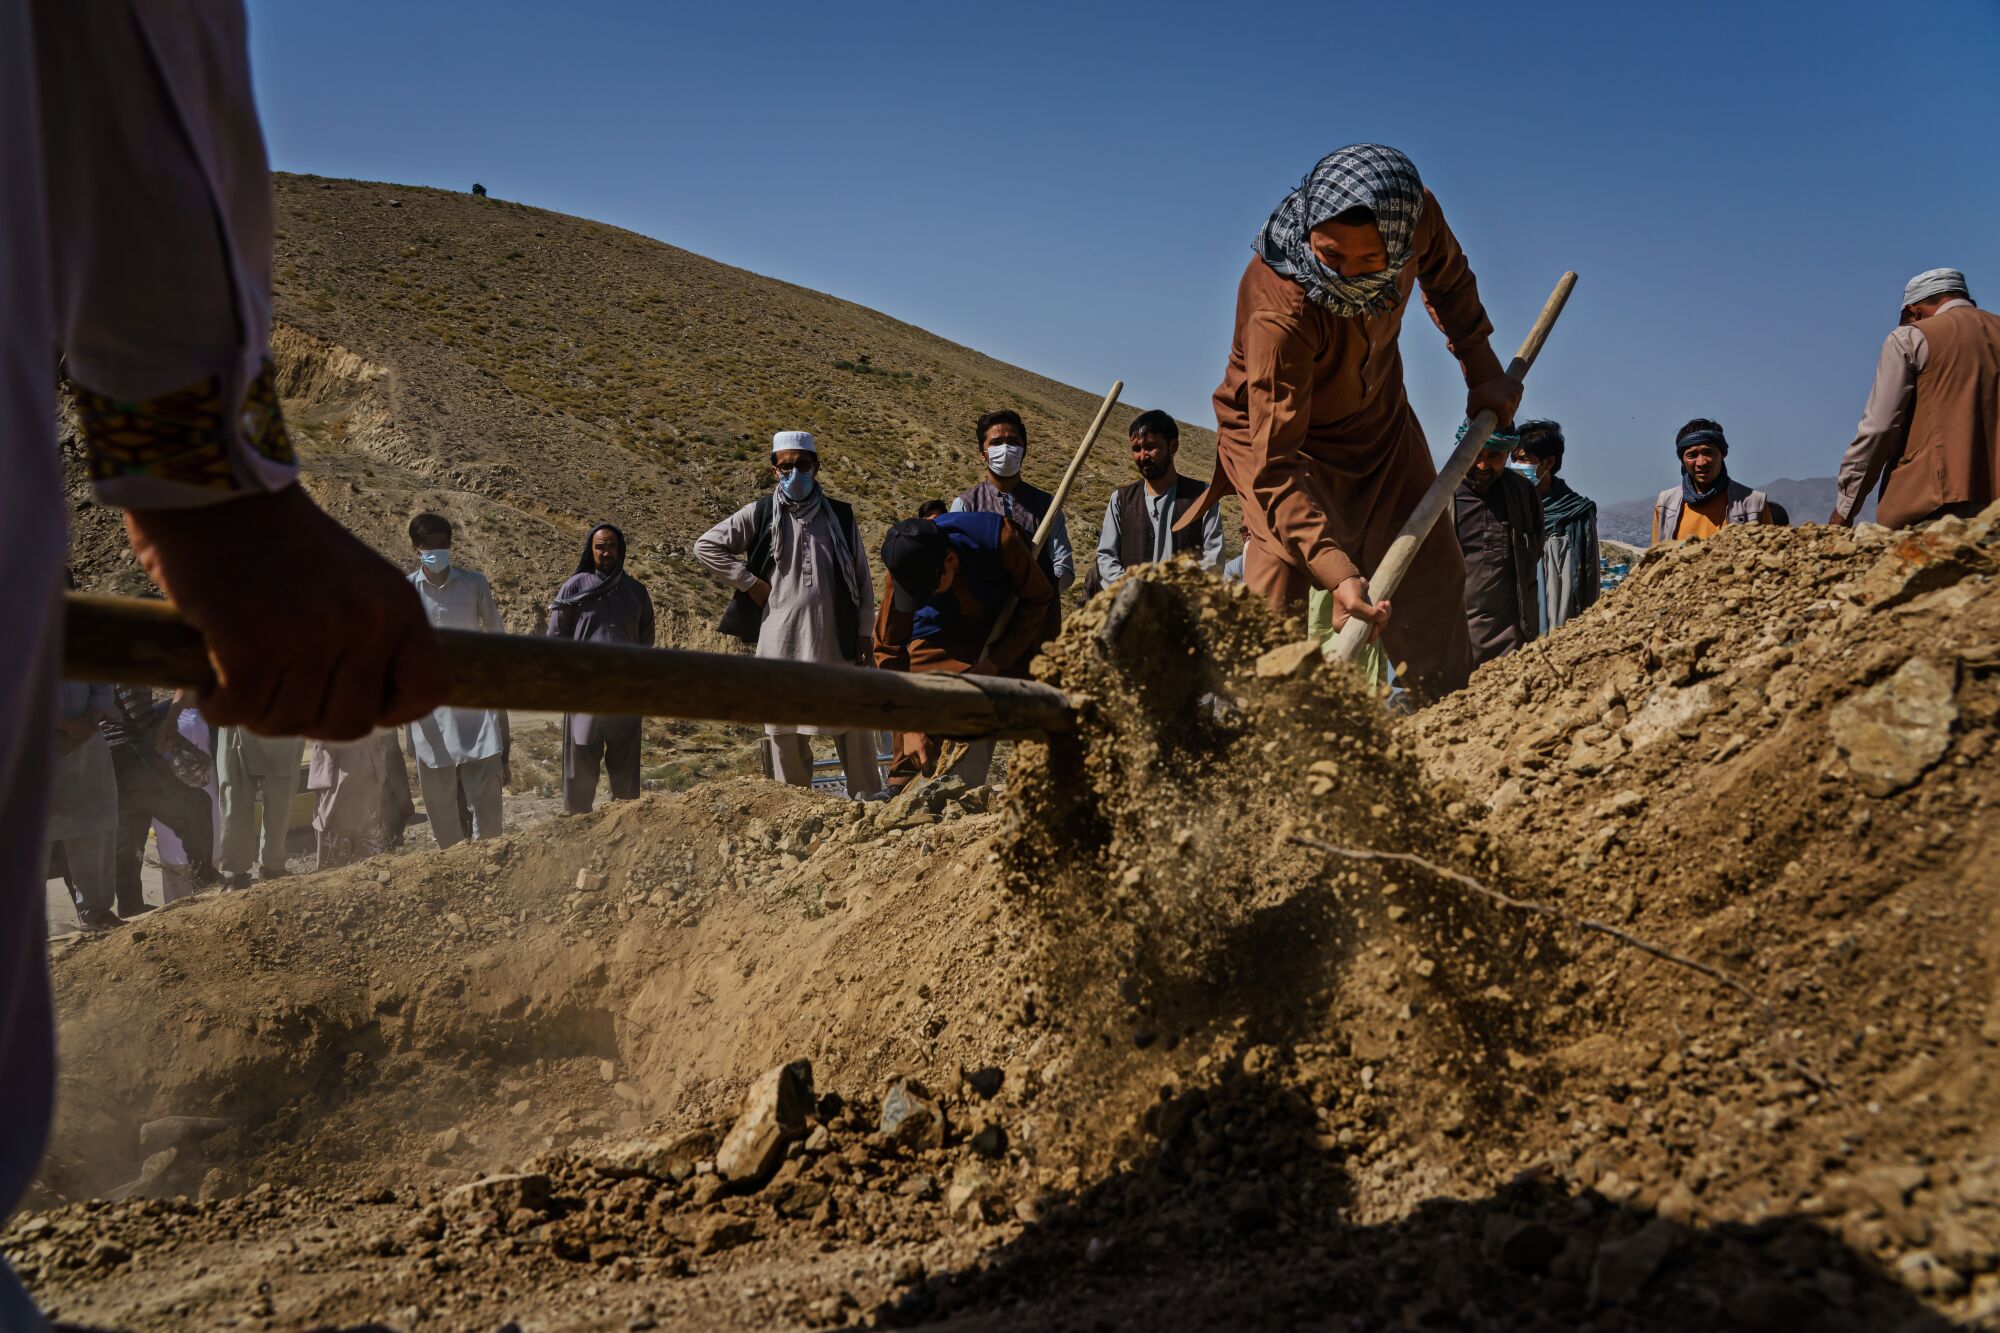 People wait as others dig a grave with shovels.